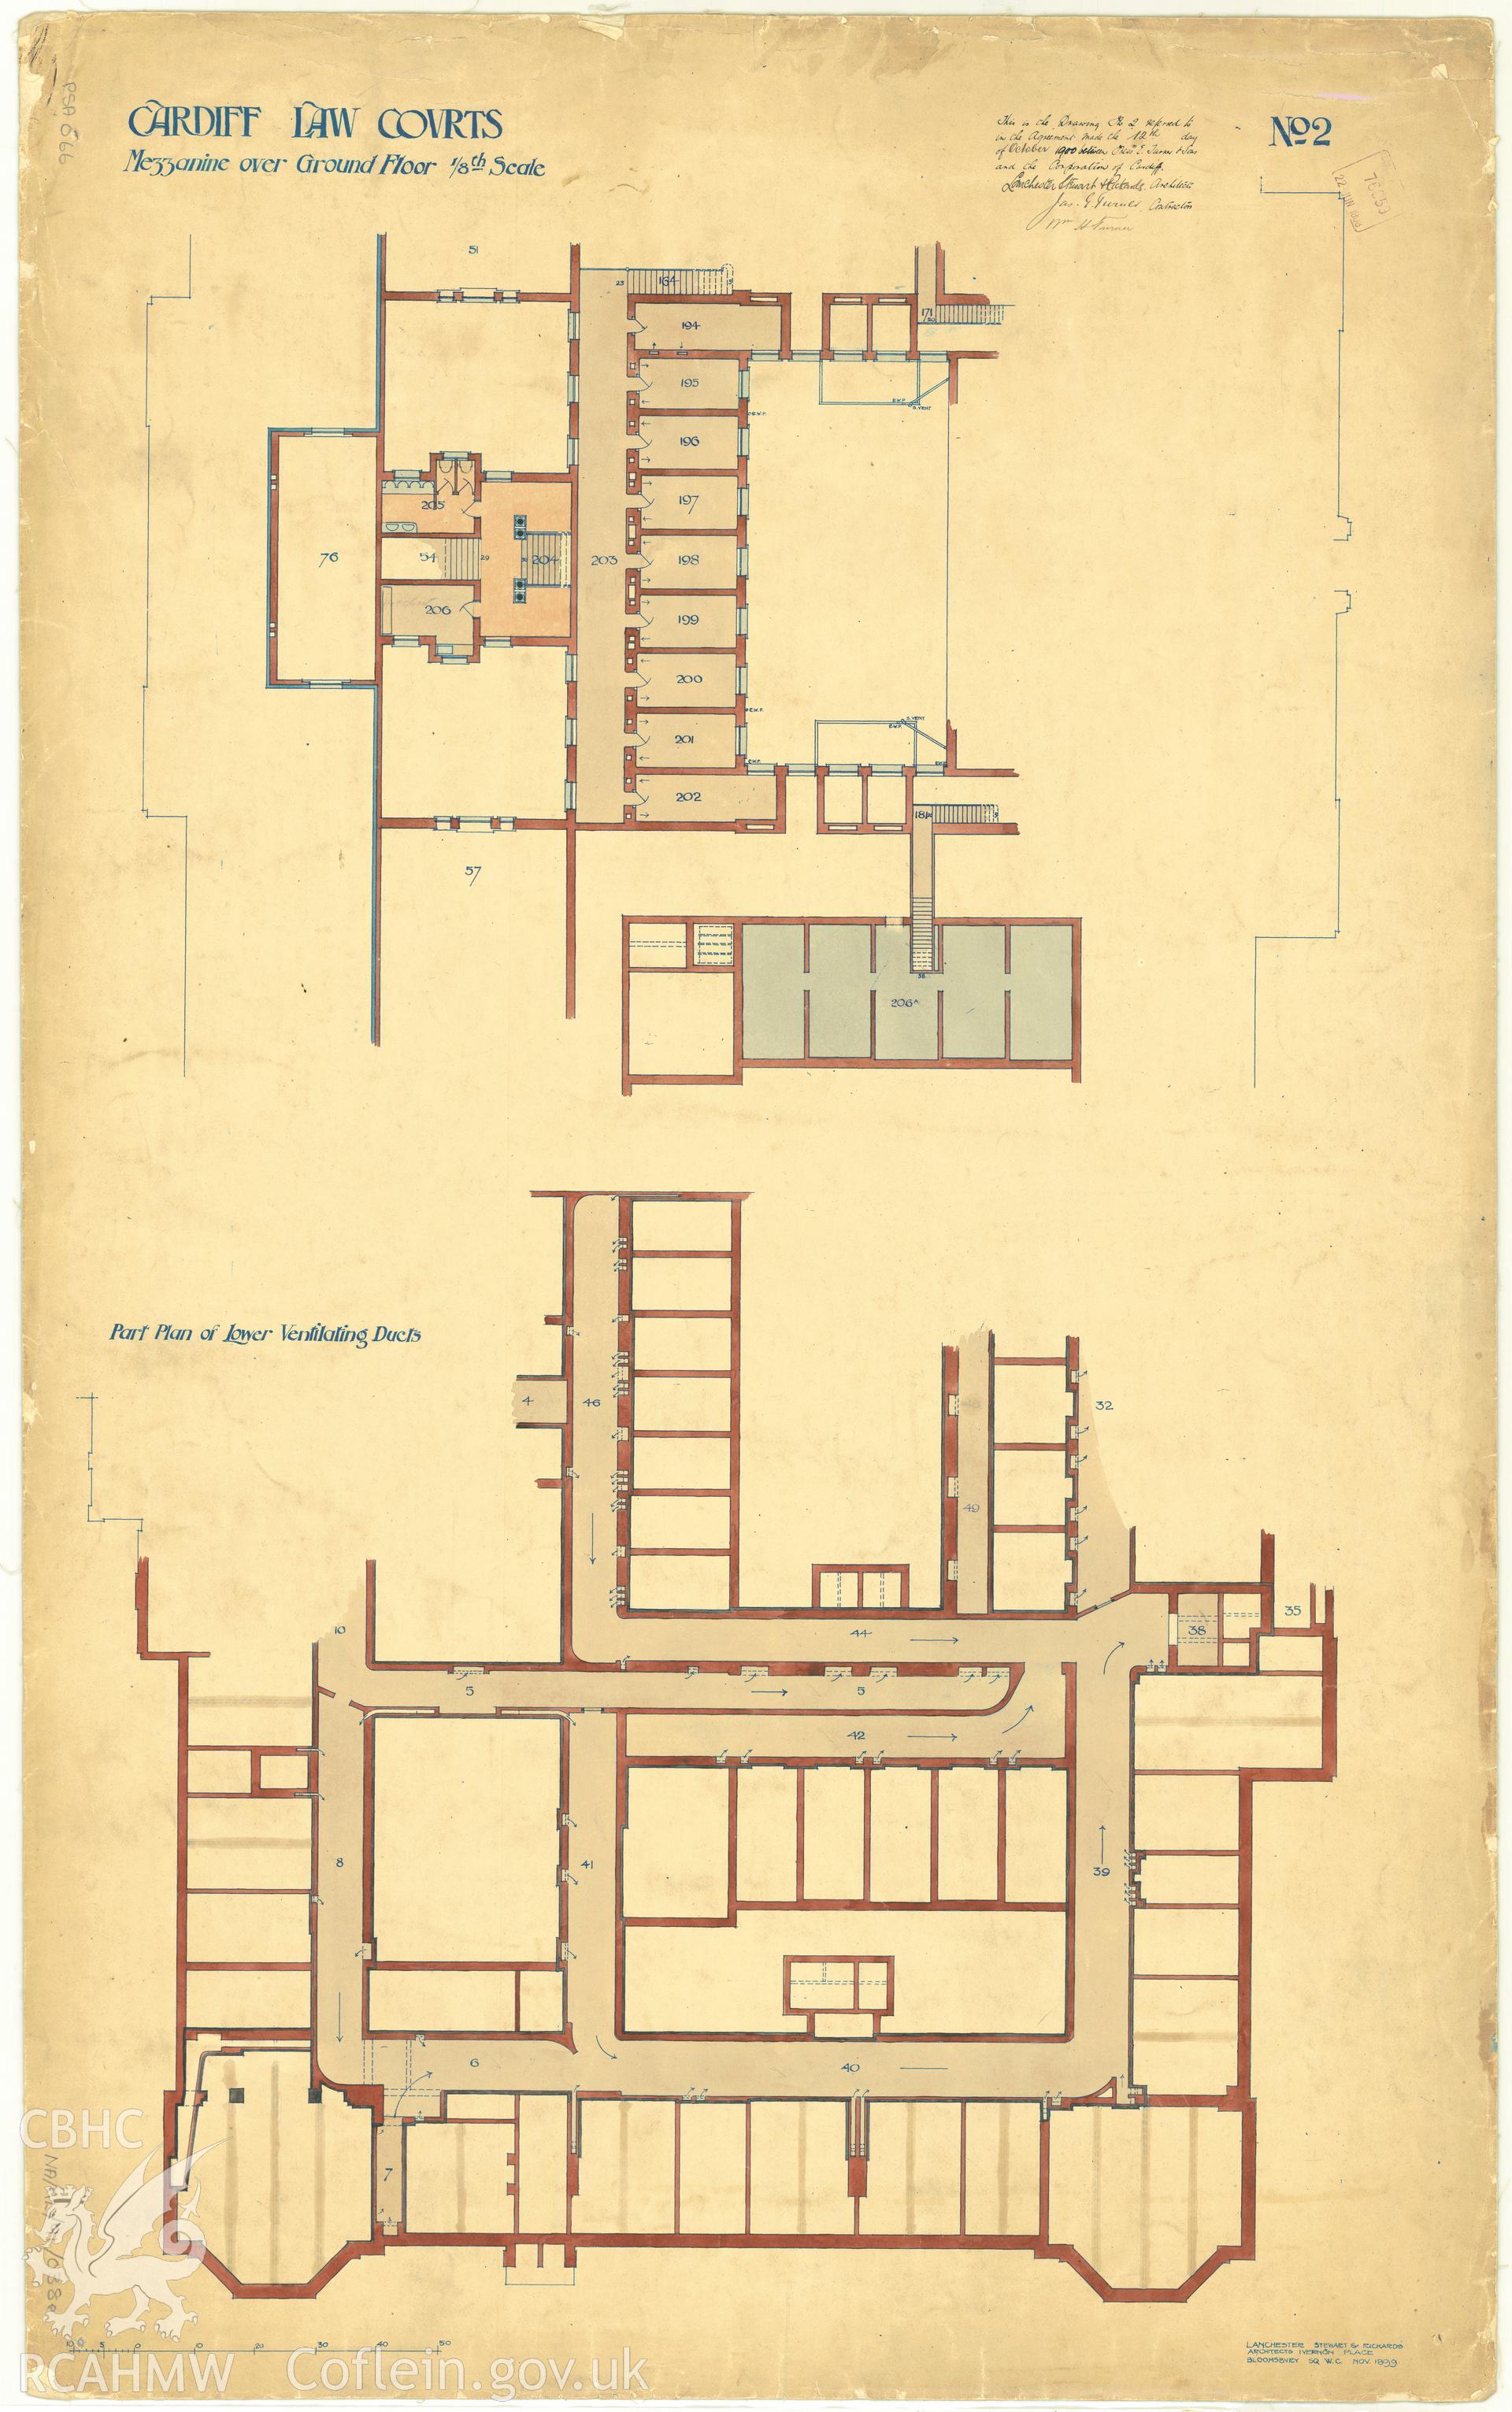 Law Court, Cathays Park, Cardiff; measured drawing showing plan of the mezzanine over the ground floor and part plan of lower ventilating ducts, produced by Lanchester Stewart and Rickards, 1899.